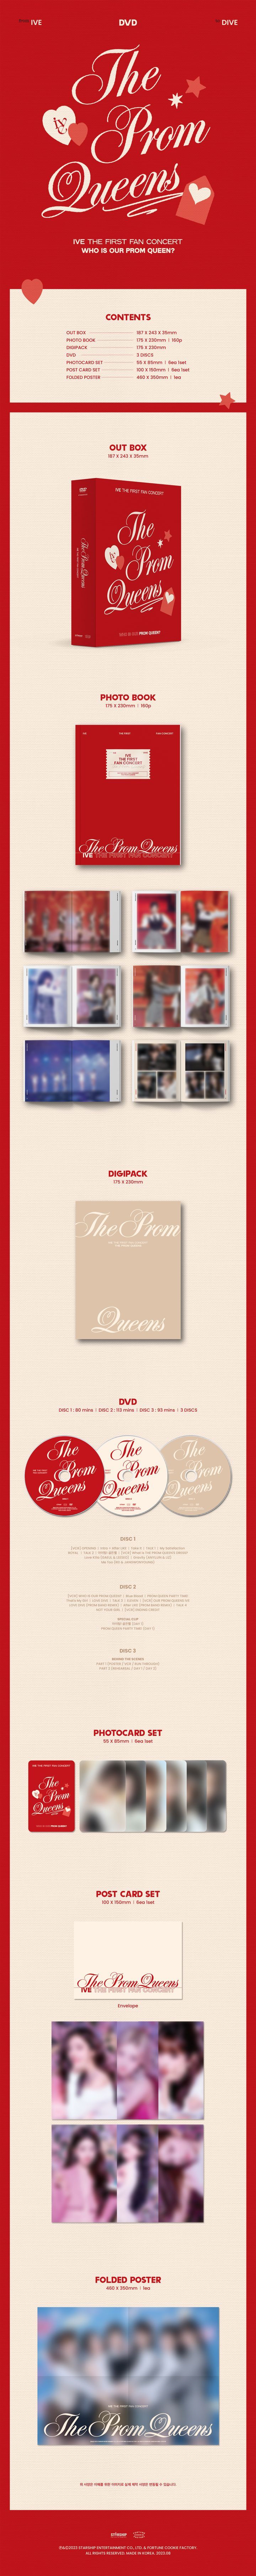 YESASIA : IVE - THE FIRST FAN CONCERT 'The Prom Queens' (DVD) (3